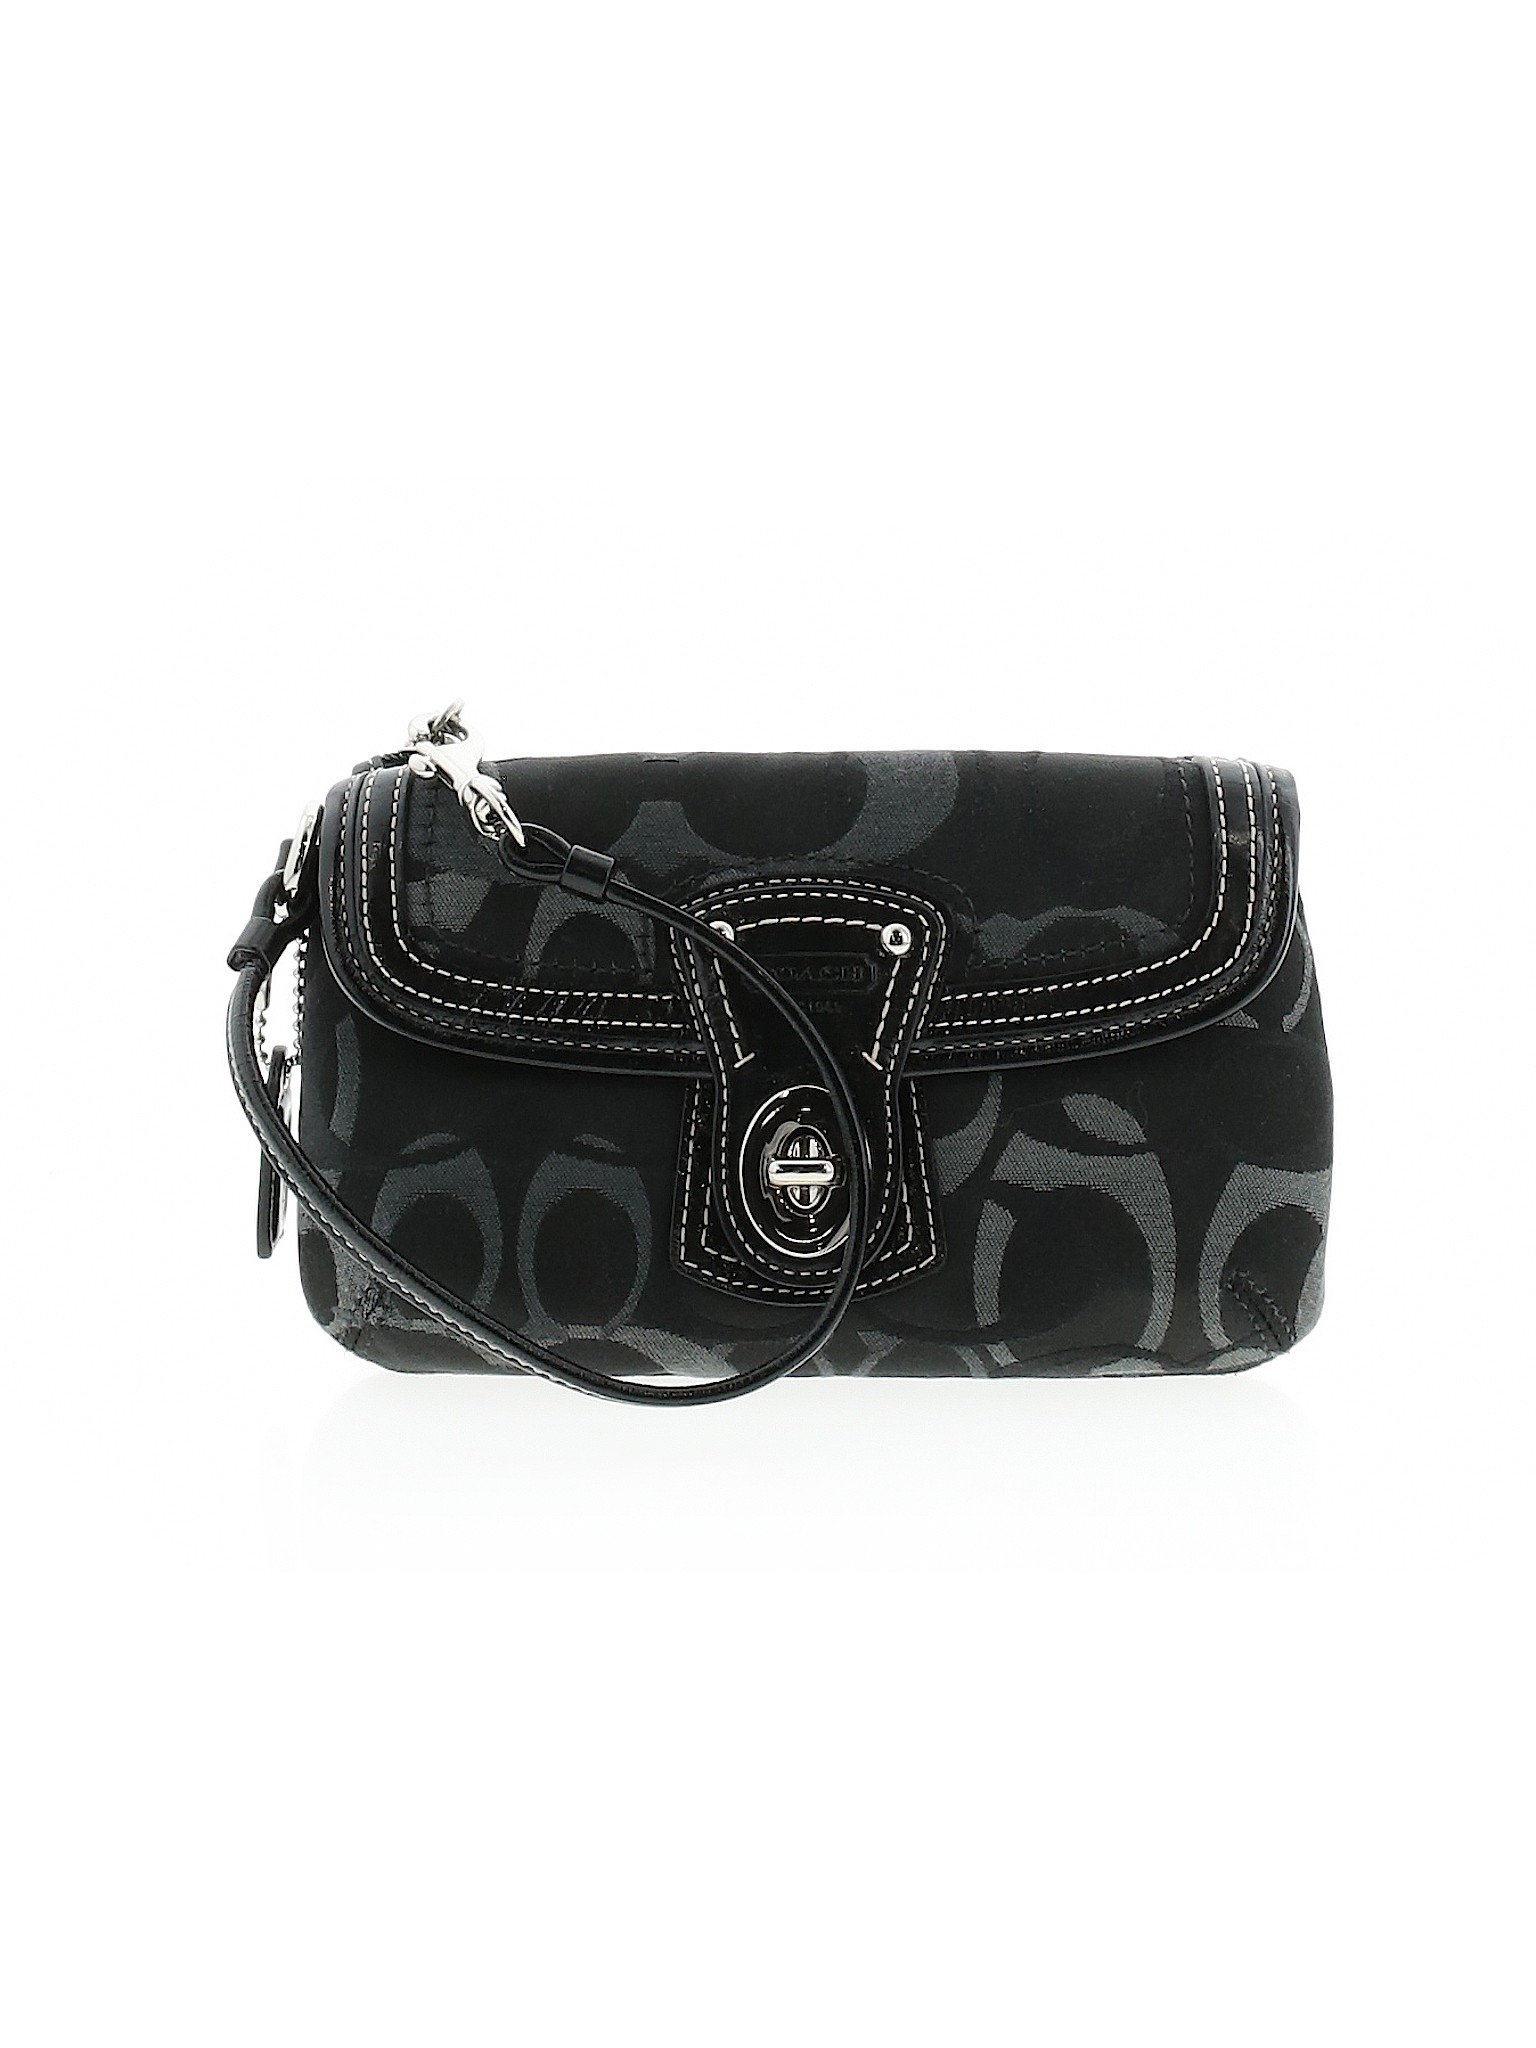 Coach Factory Solid Black Wristlet One Size - 66% off | thredUP